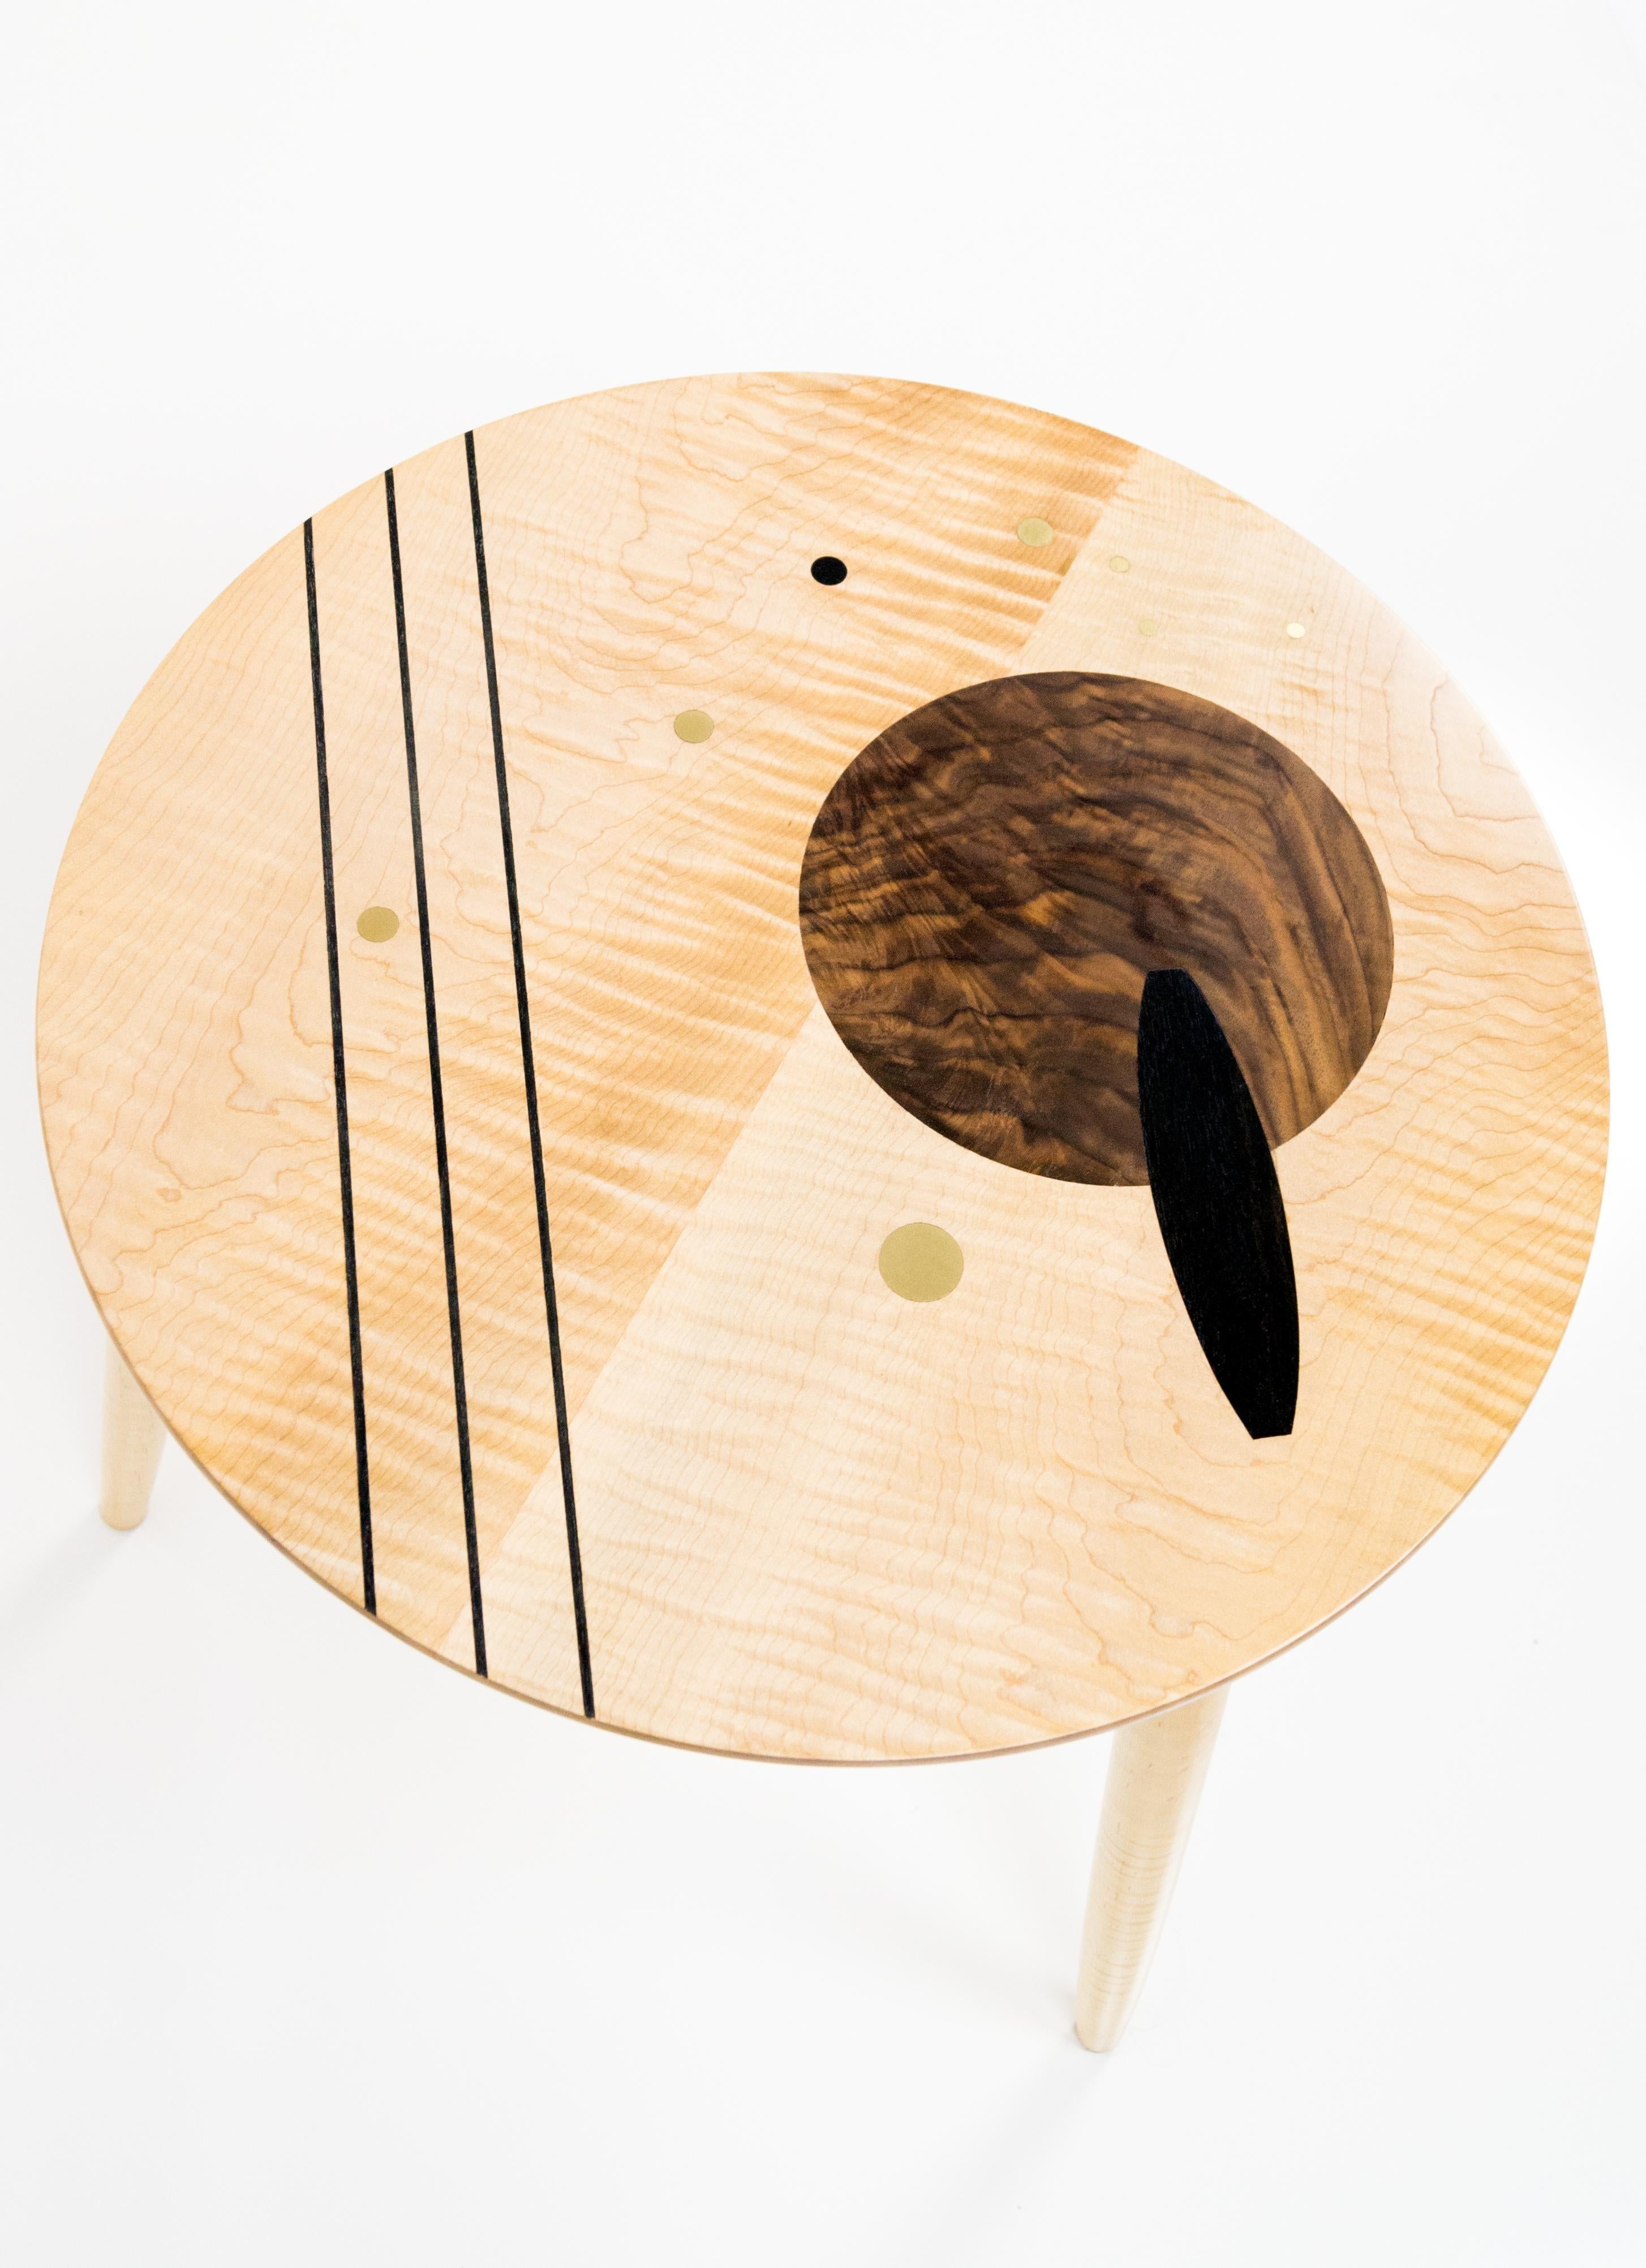 This inlay side table or coffee table is made from Ebony and Walnut woods. Inspired by the geometrics forms in mid-century modern design, this piece would look great in nay vintage inspired or contemporary space. This table is hand crafter by the